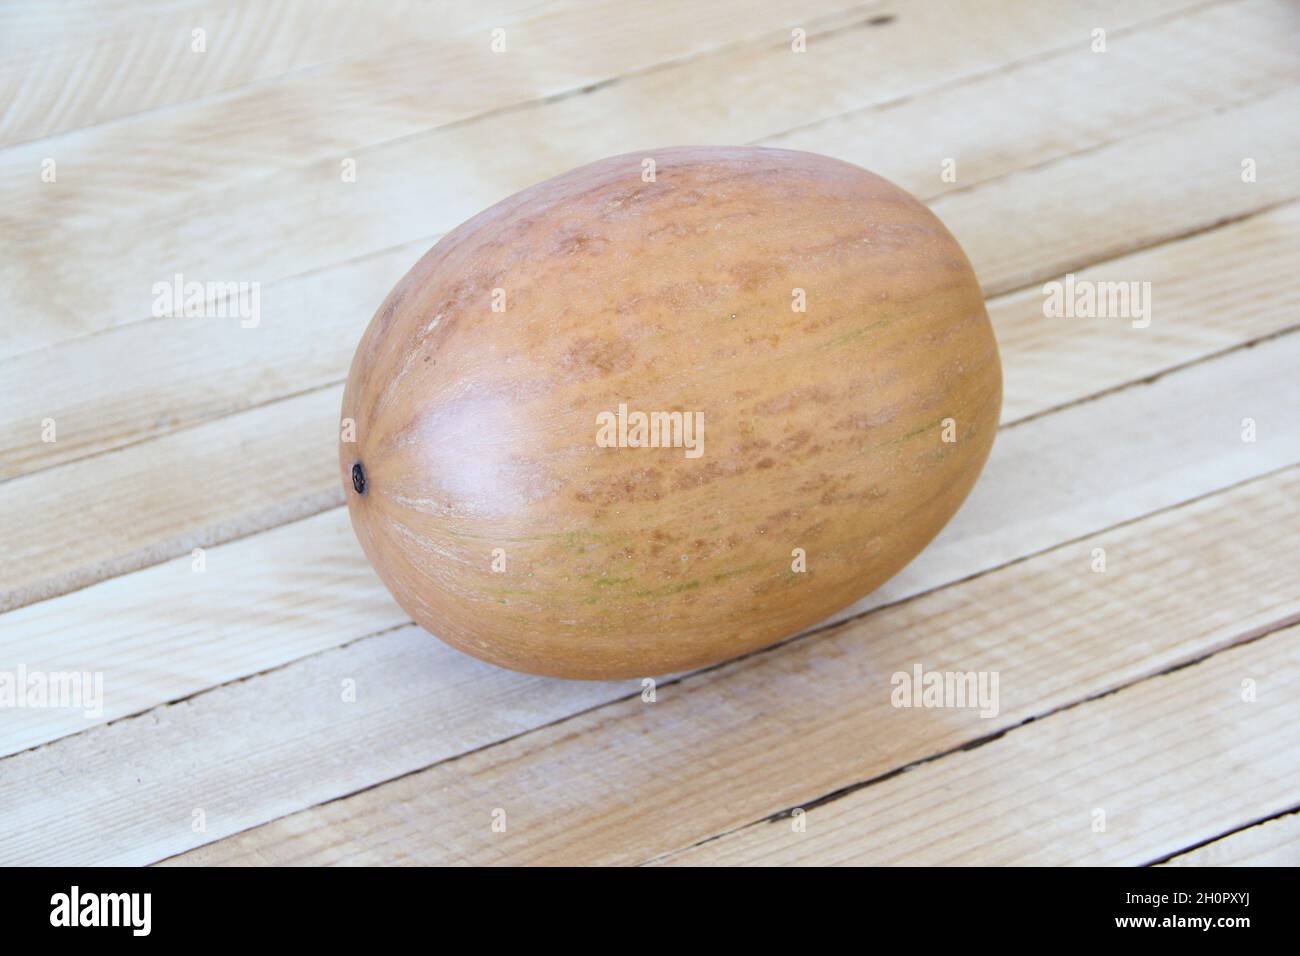 Small round pumpkin on the wooden background Stock Photo